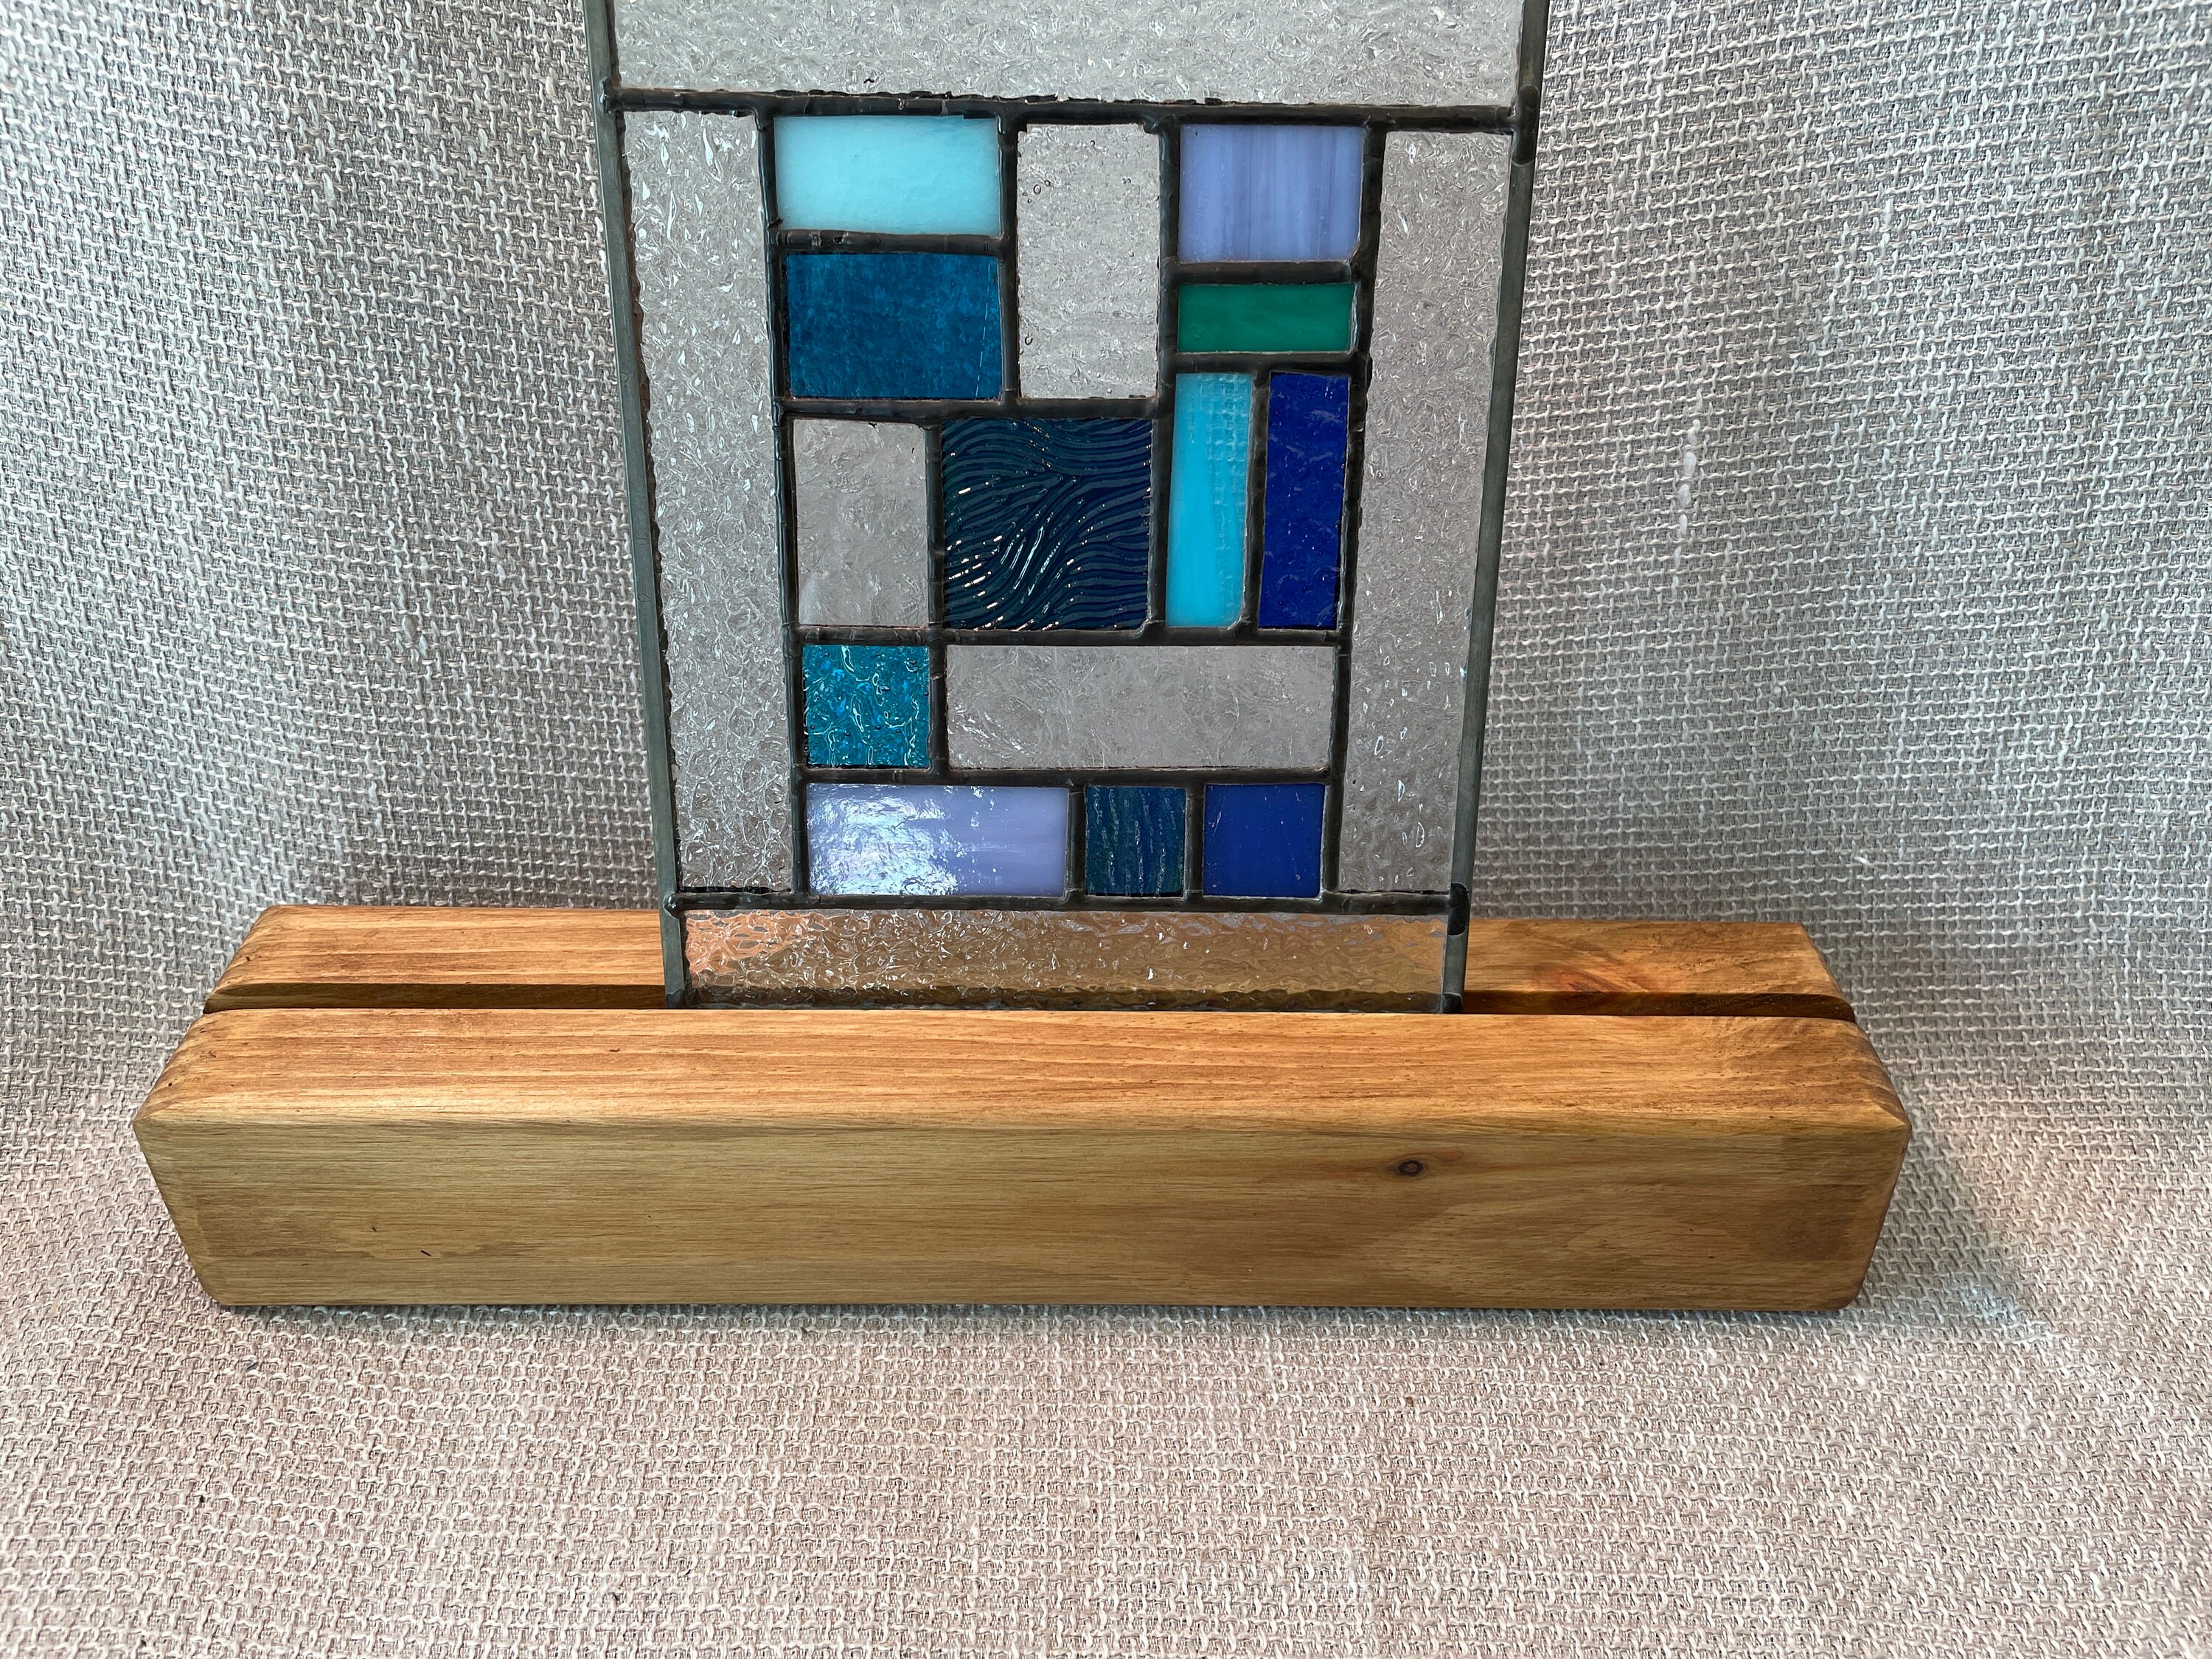 Display Stand for Art, Stained Glass Art Display Stand, Fused Glass Art  Stand, Reclaimed Wood Art Stand, Art Display Stand, Glass Art Stand 